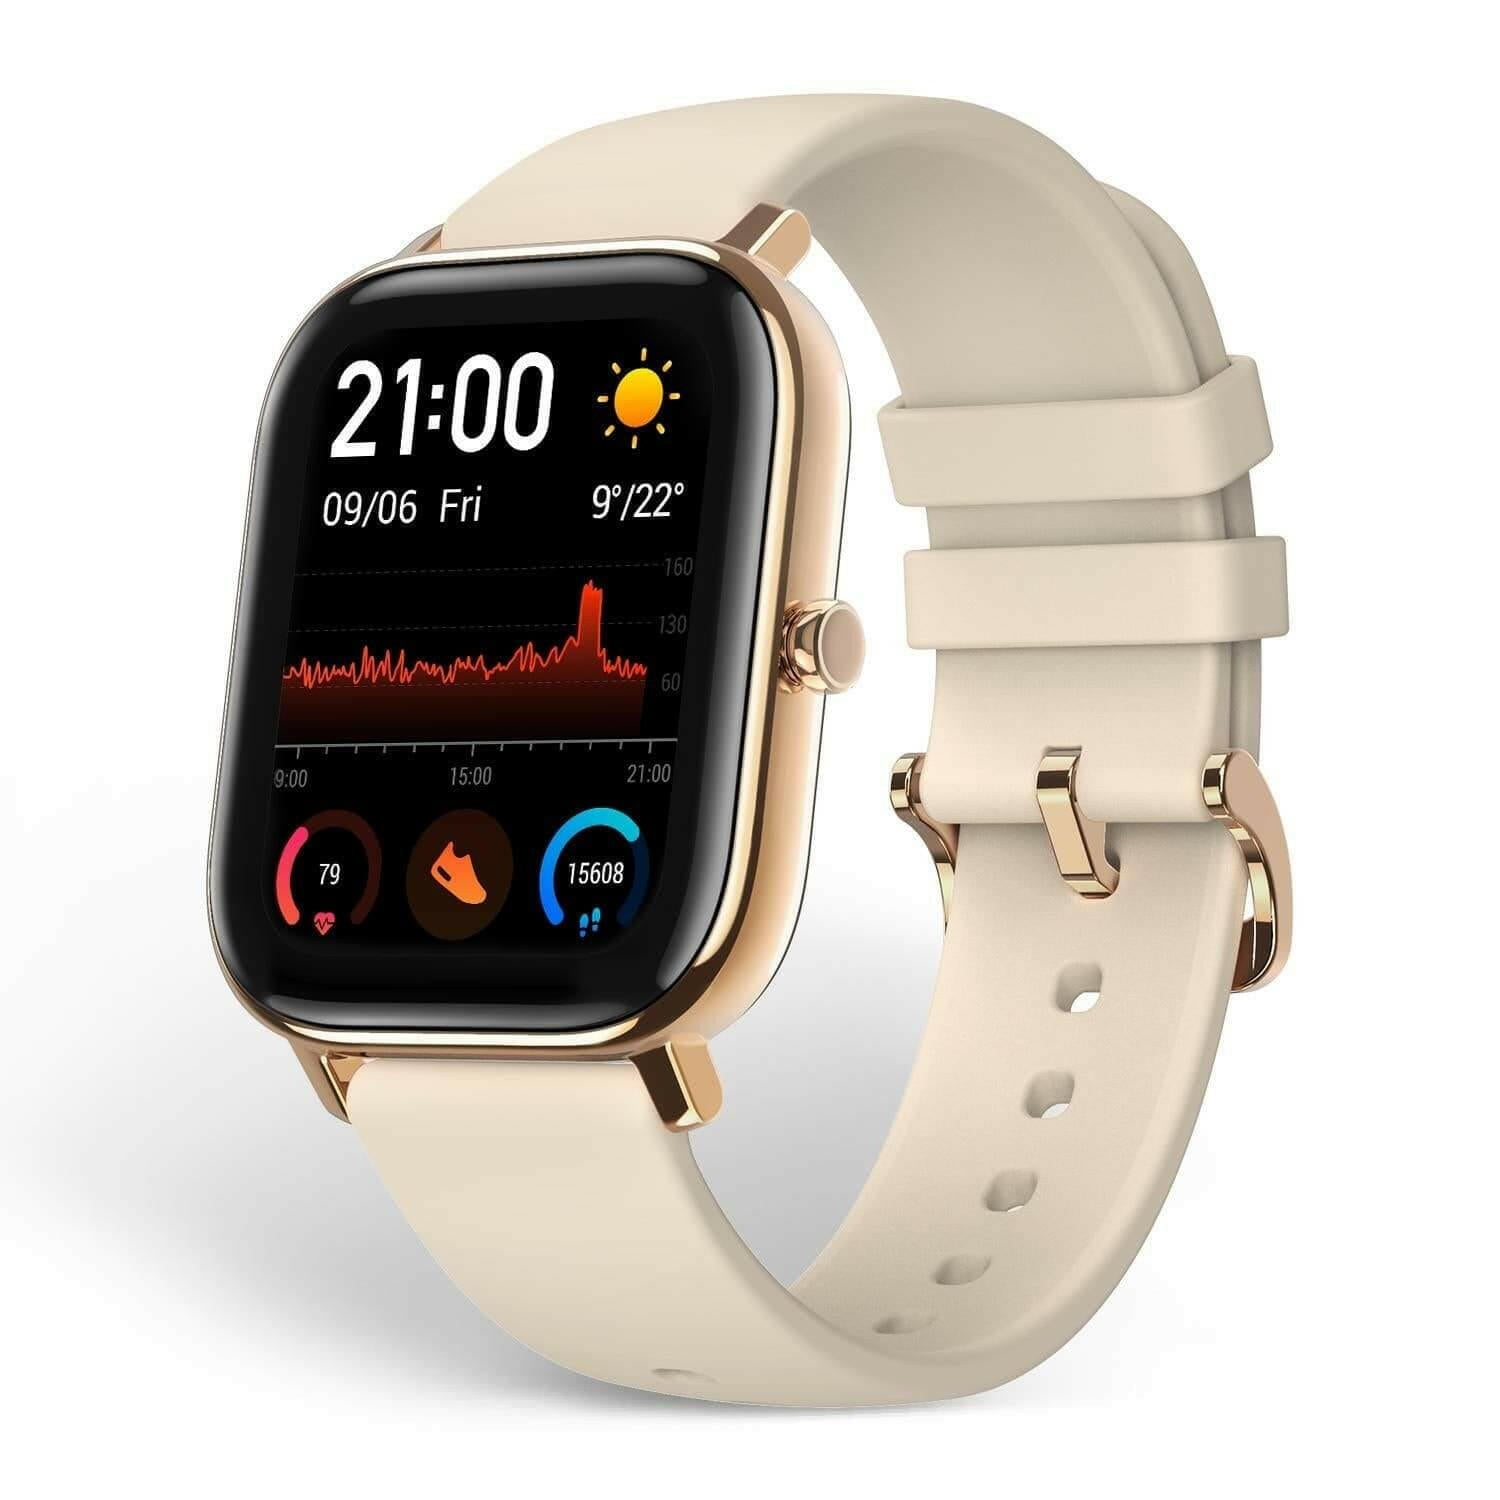 Apple Watch deal: Save $60 on the Apple Watch SE during Cyber Monday -  Reviewed